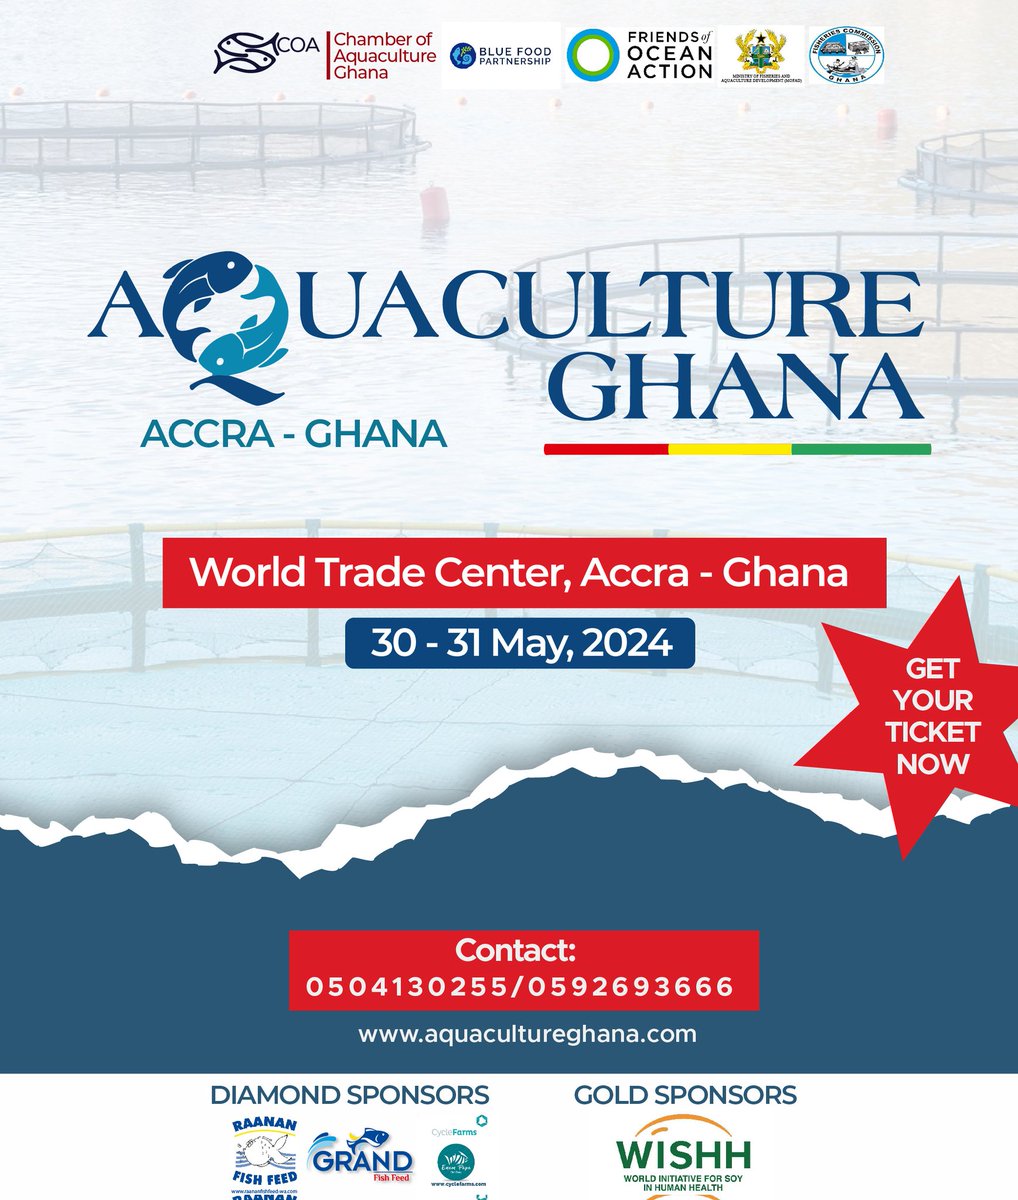 Have you secured your ticket for the Aquaculture Ghana 2024 Exhibition and Awards yet? Don't miss out on this incredible opportunity! Limited seats are available, so make sure to register now to join us in celebrating, recognizing, and fostering growth within the aquaculture.